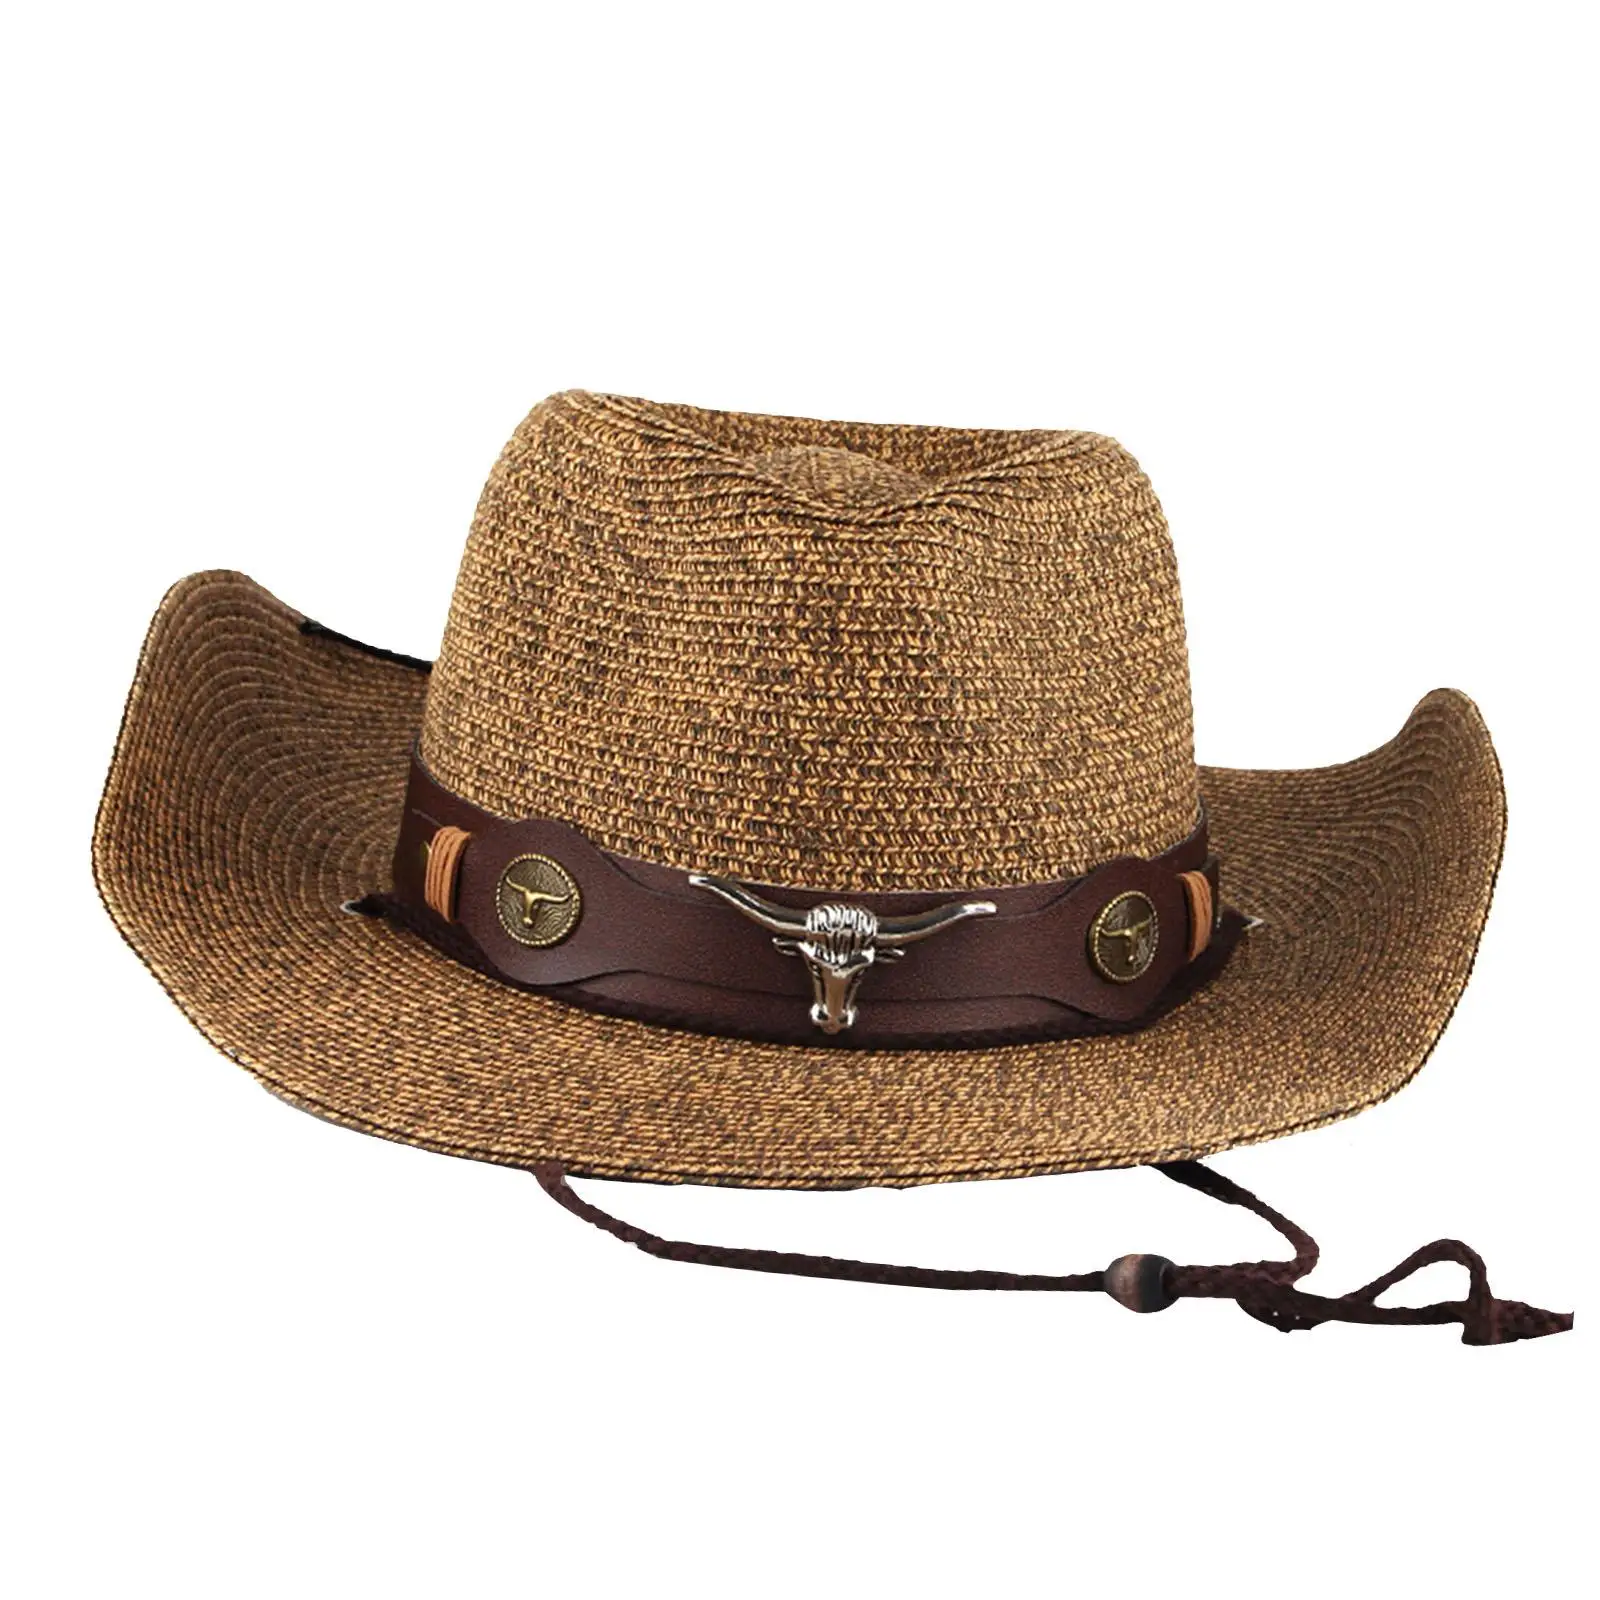 Western Straw Cowboy Hat, Lightweight Breathable Couple hat Cowboy Hats, travel Horseback Riding Outdoor Summer